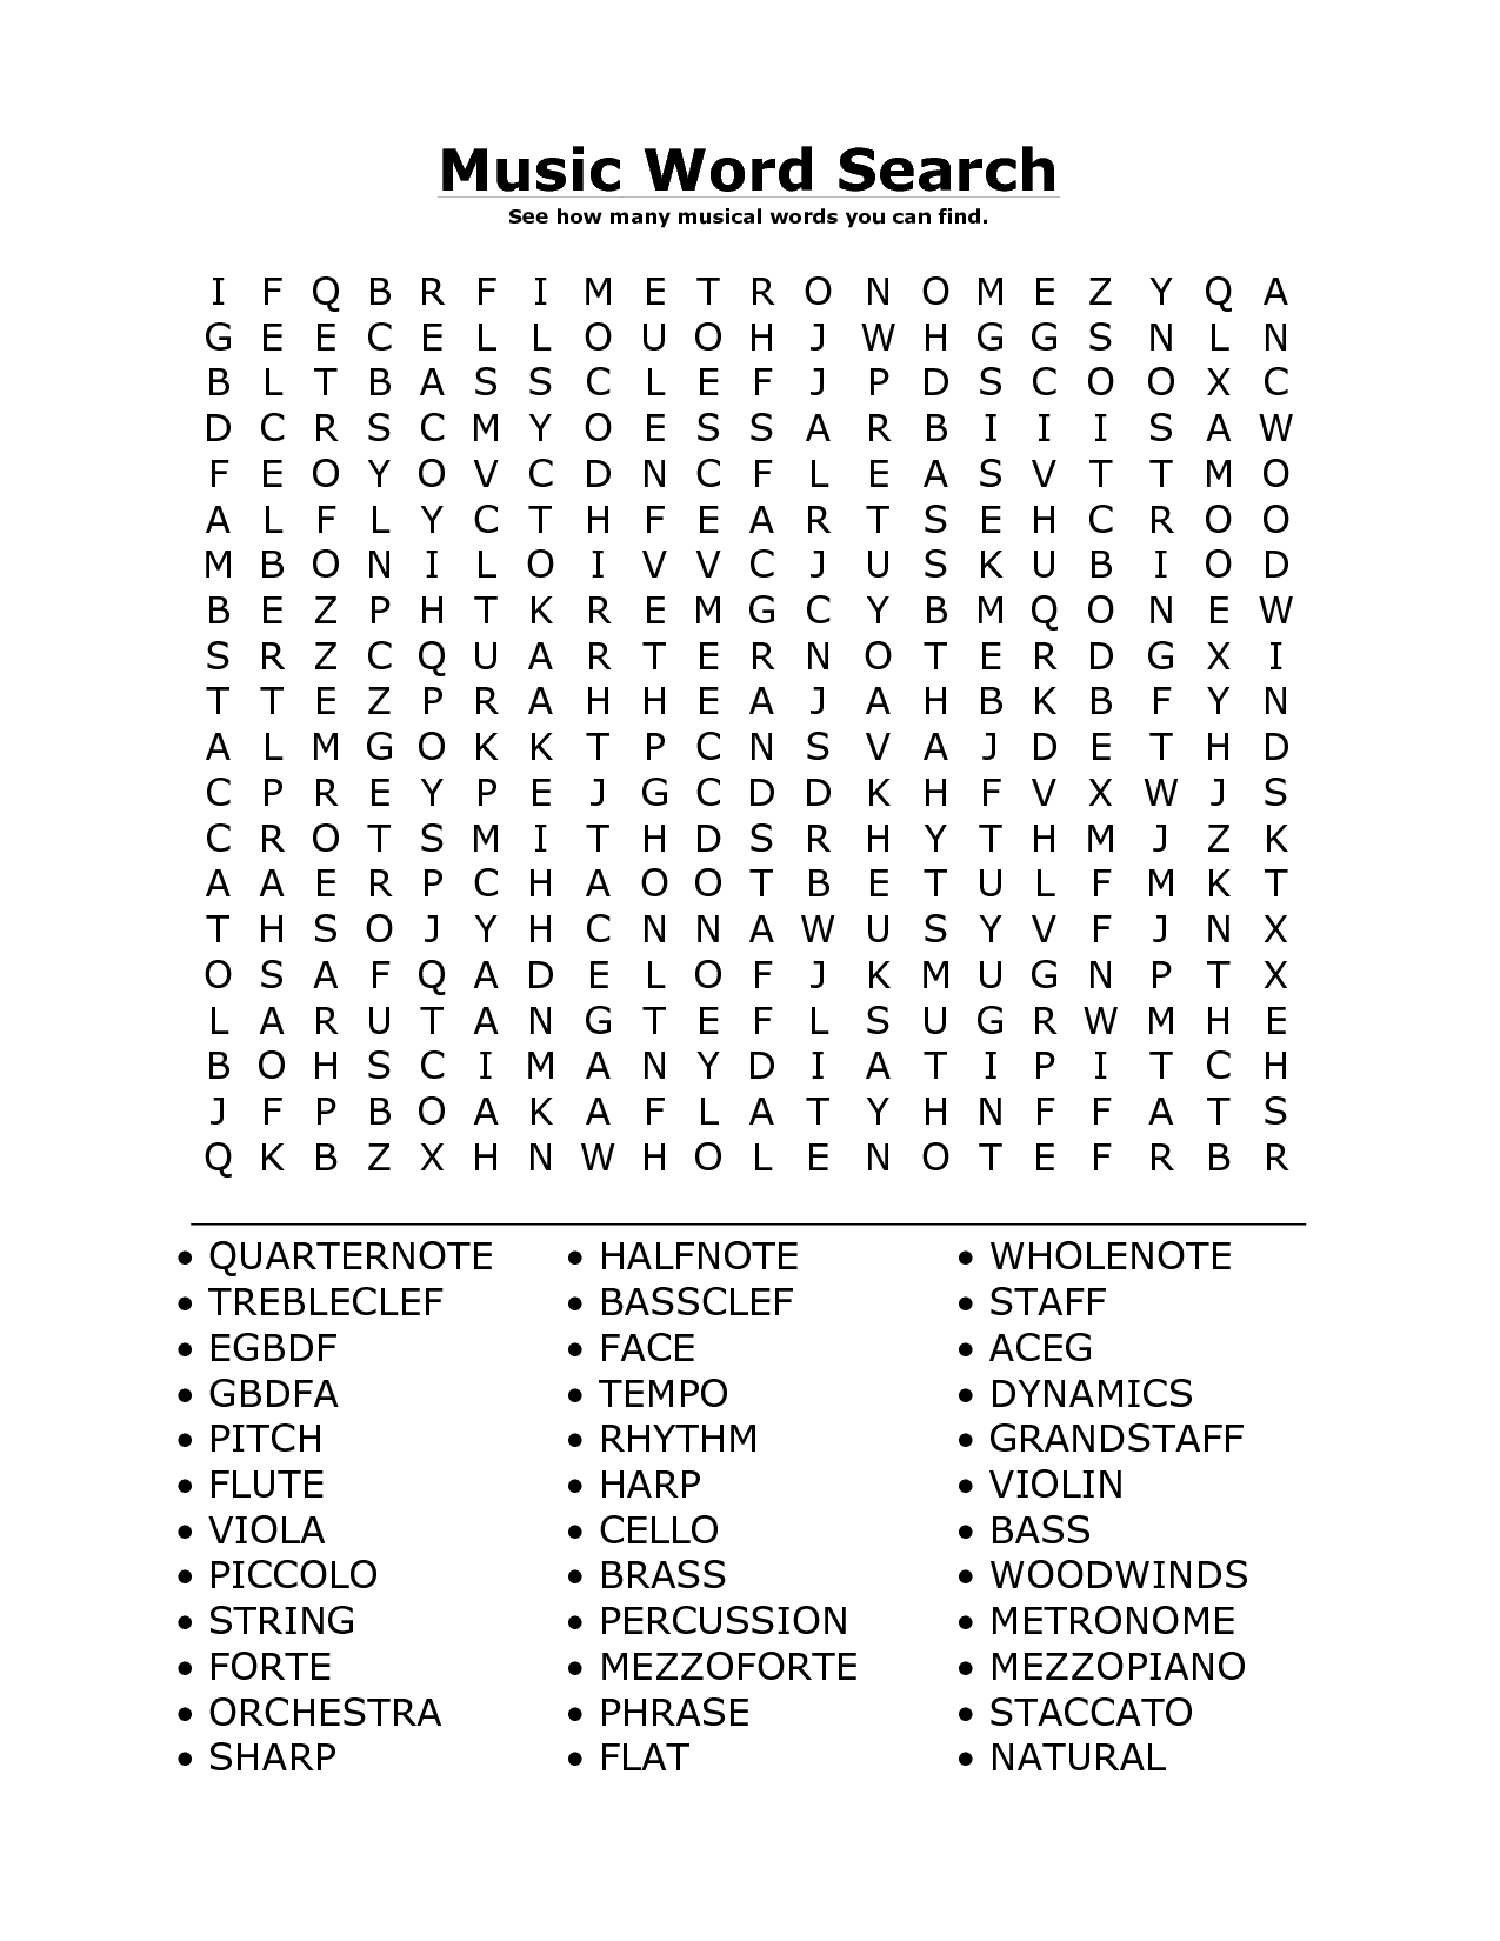 Last Minute Free Printable Word Searches Dinosaur For Kids Game #1163 - Free Printable Music Word Searches